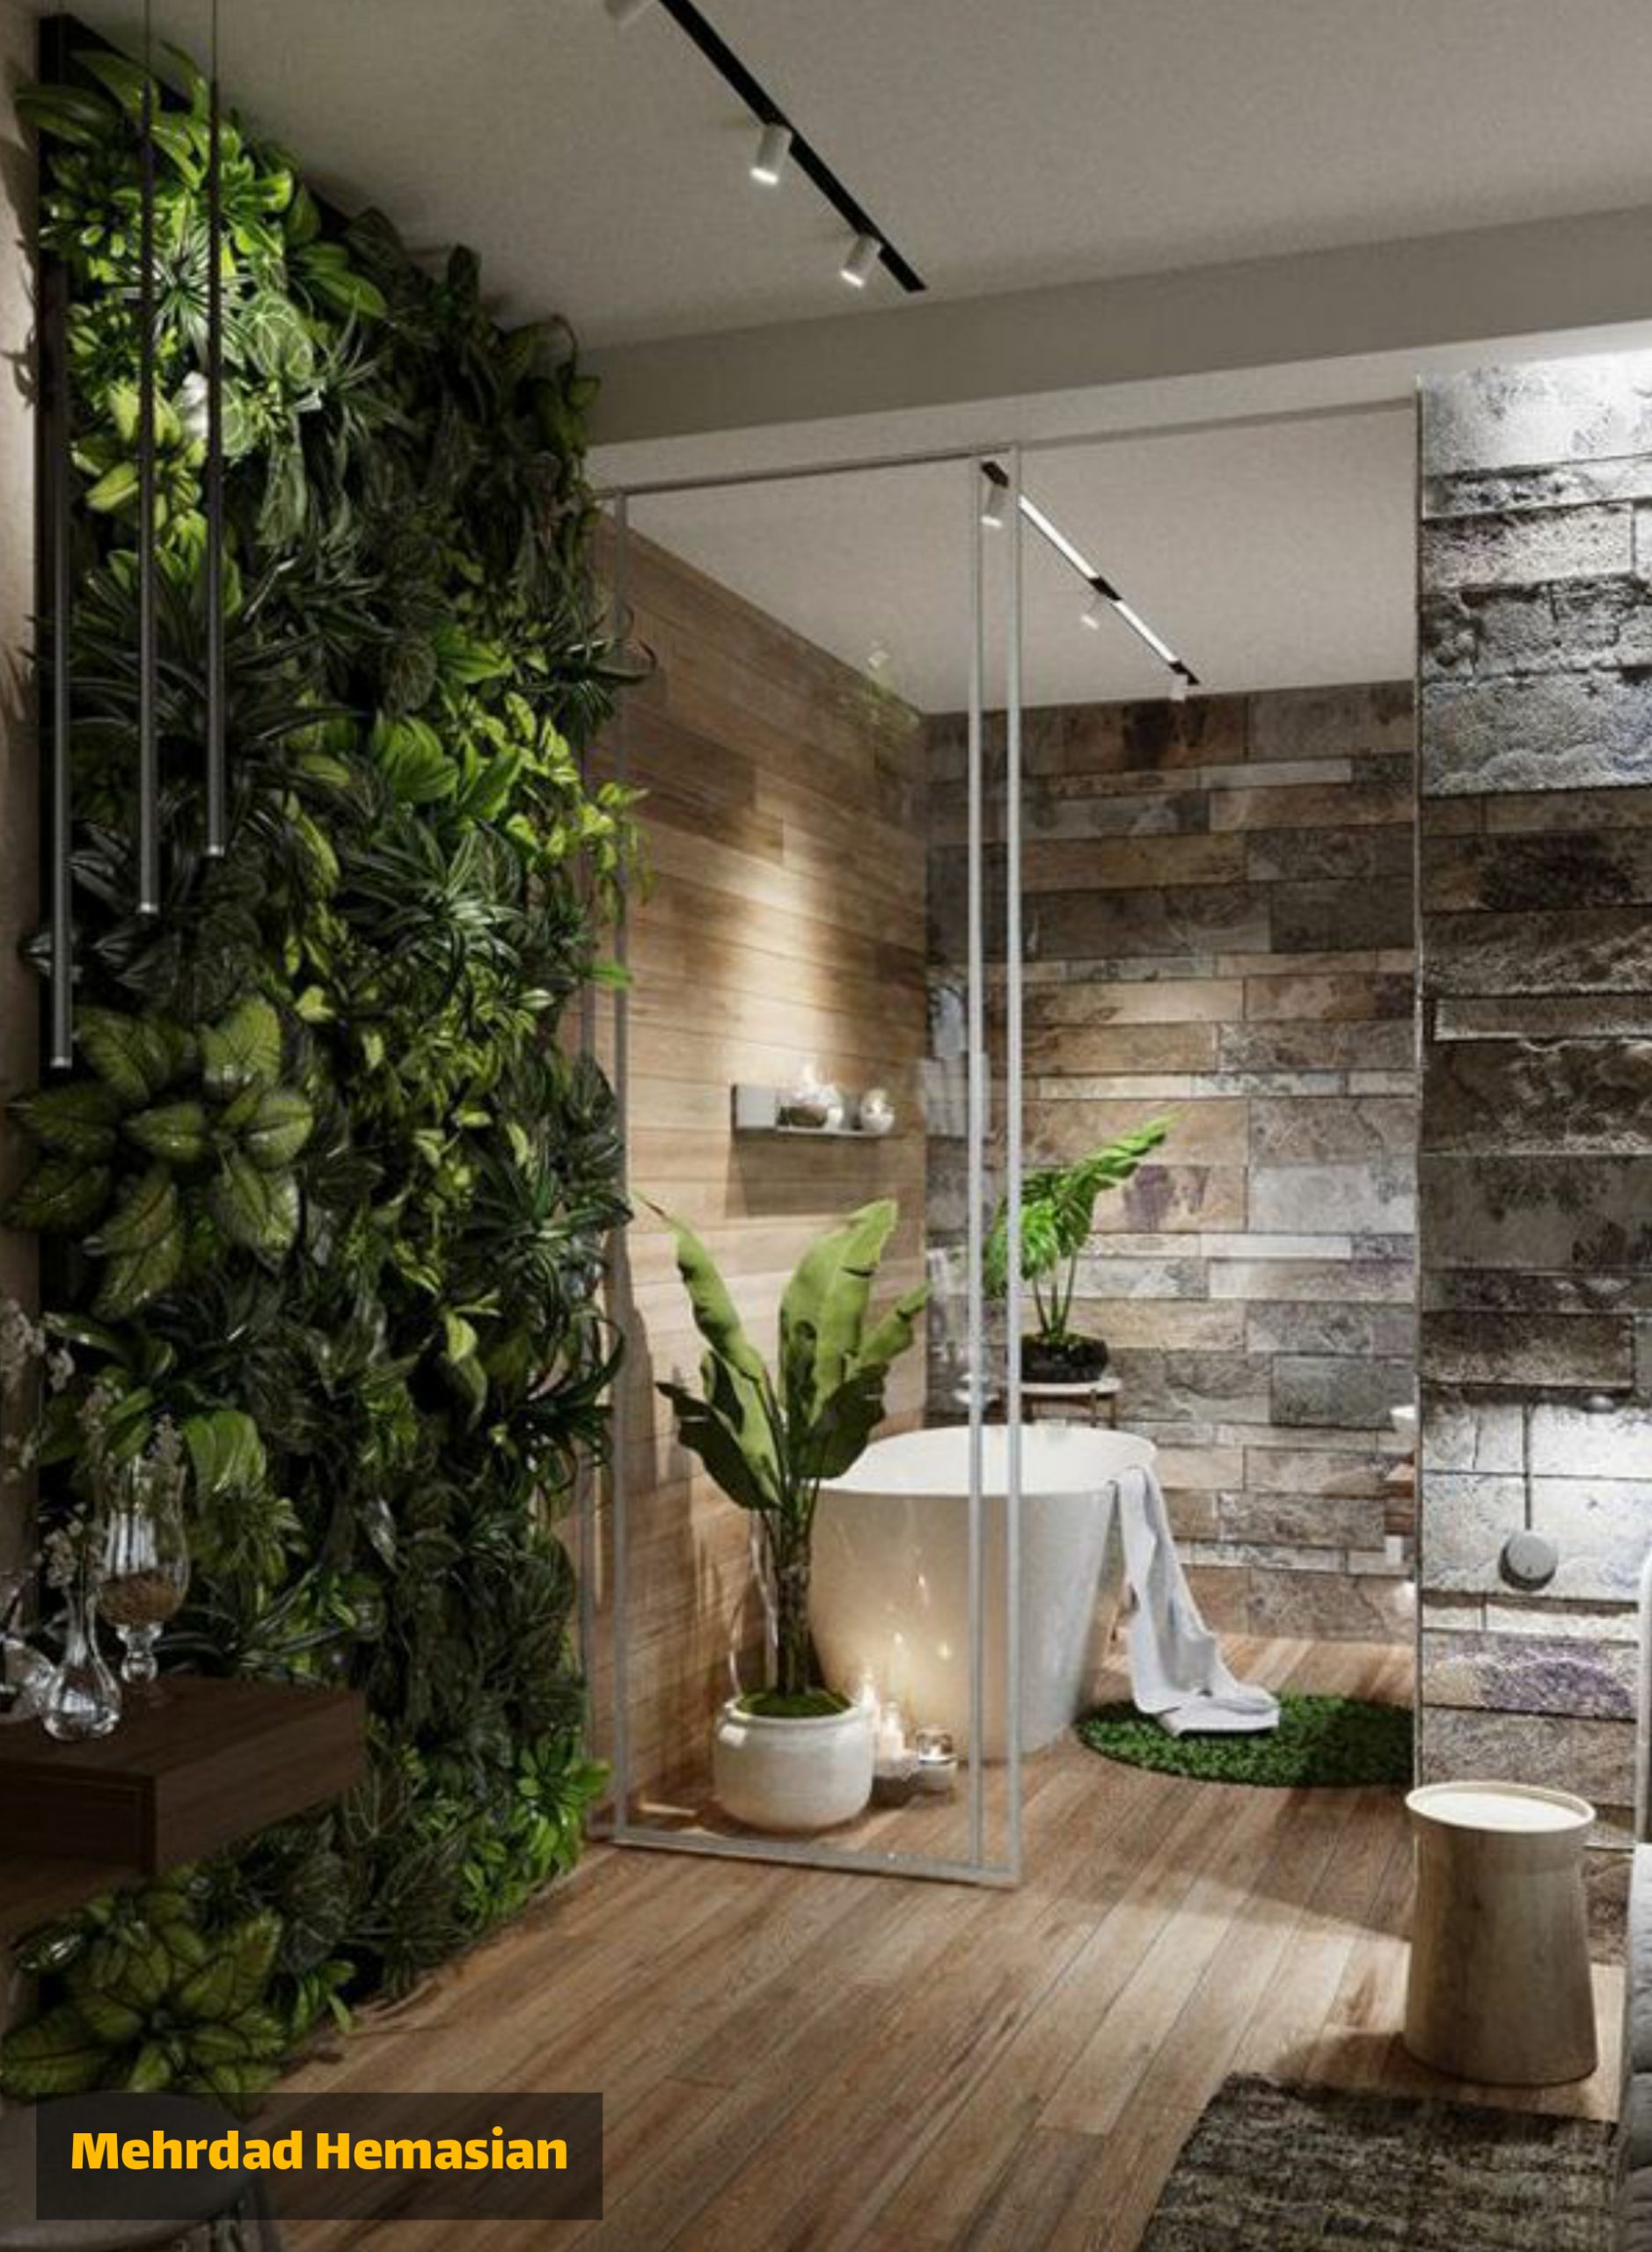 The importance of using plants in the bathroom of new apartments